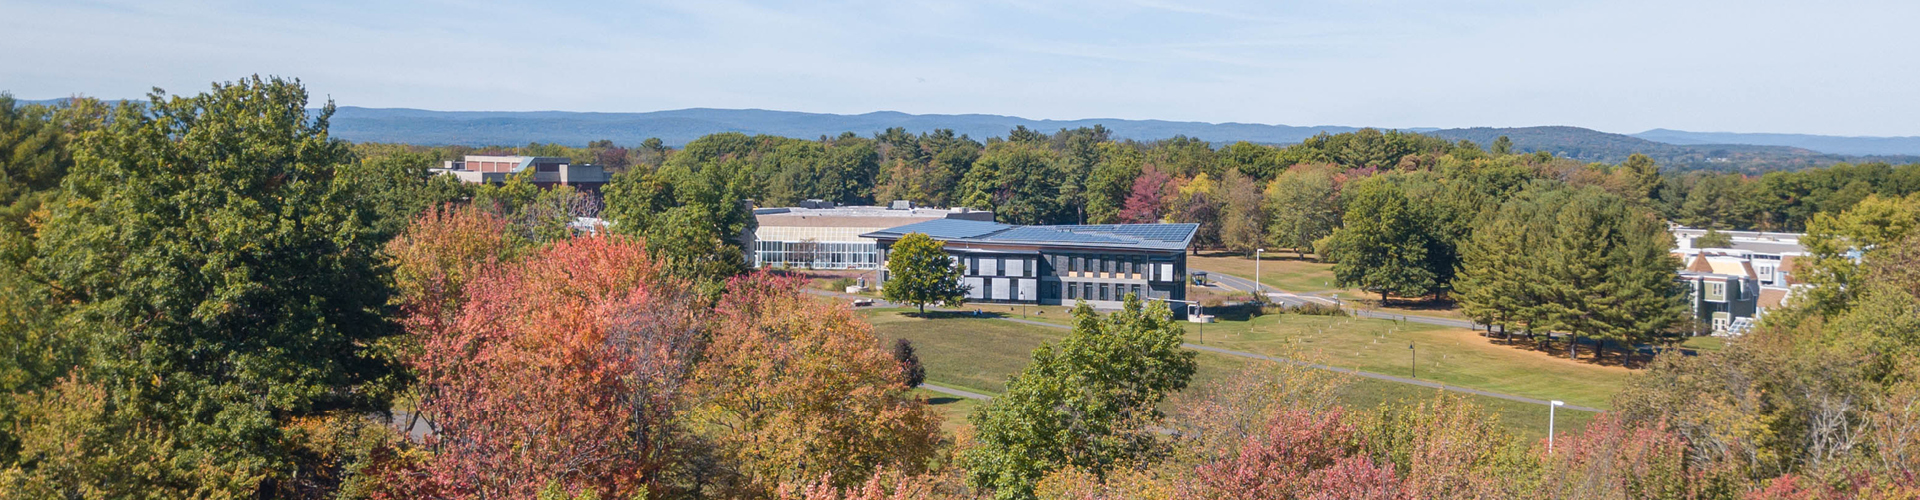 Hampshire College and the Kern Center in the fall